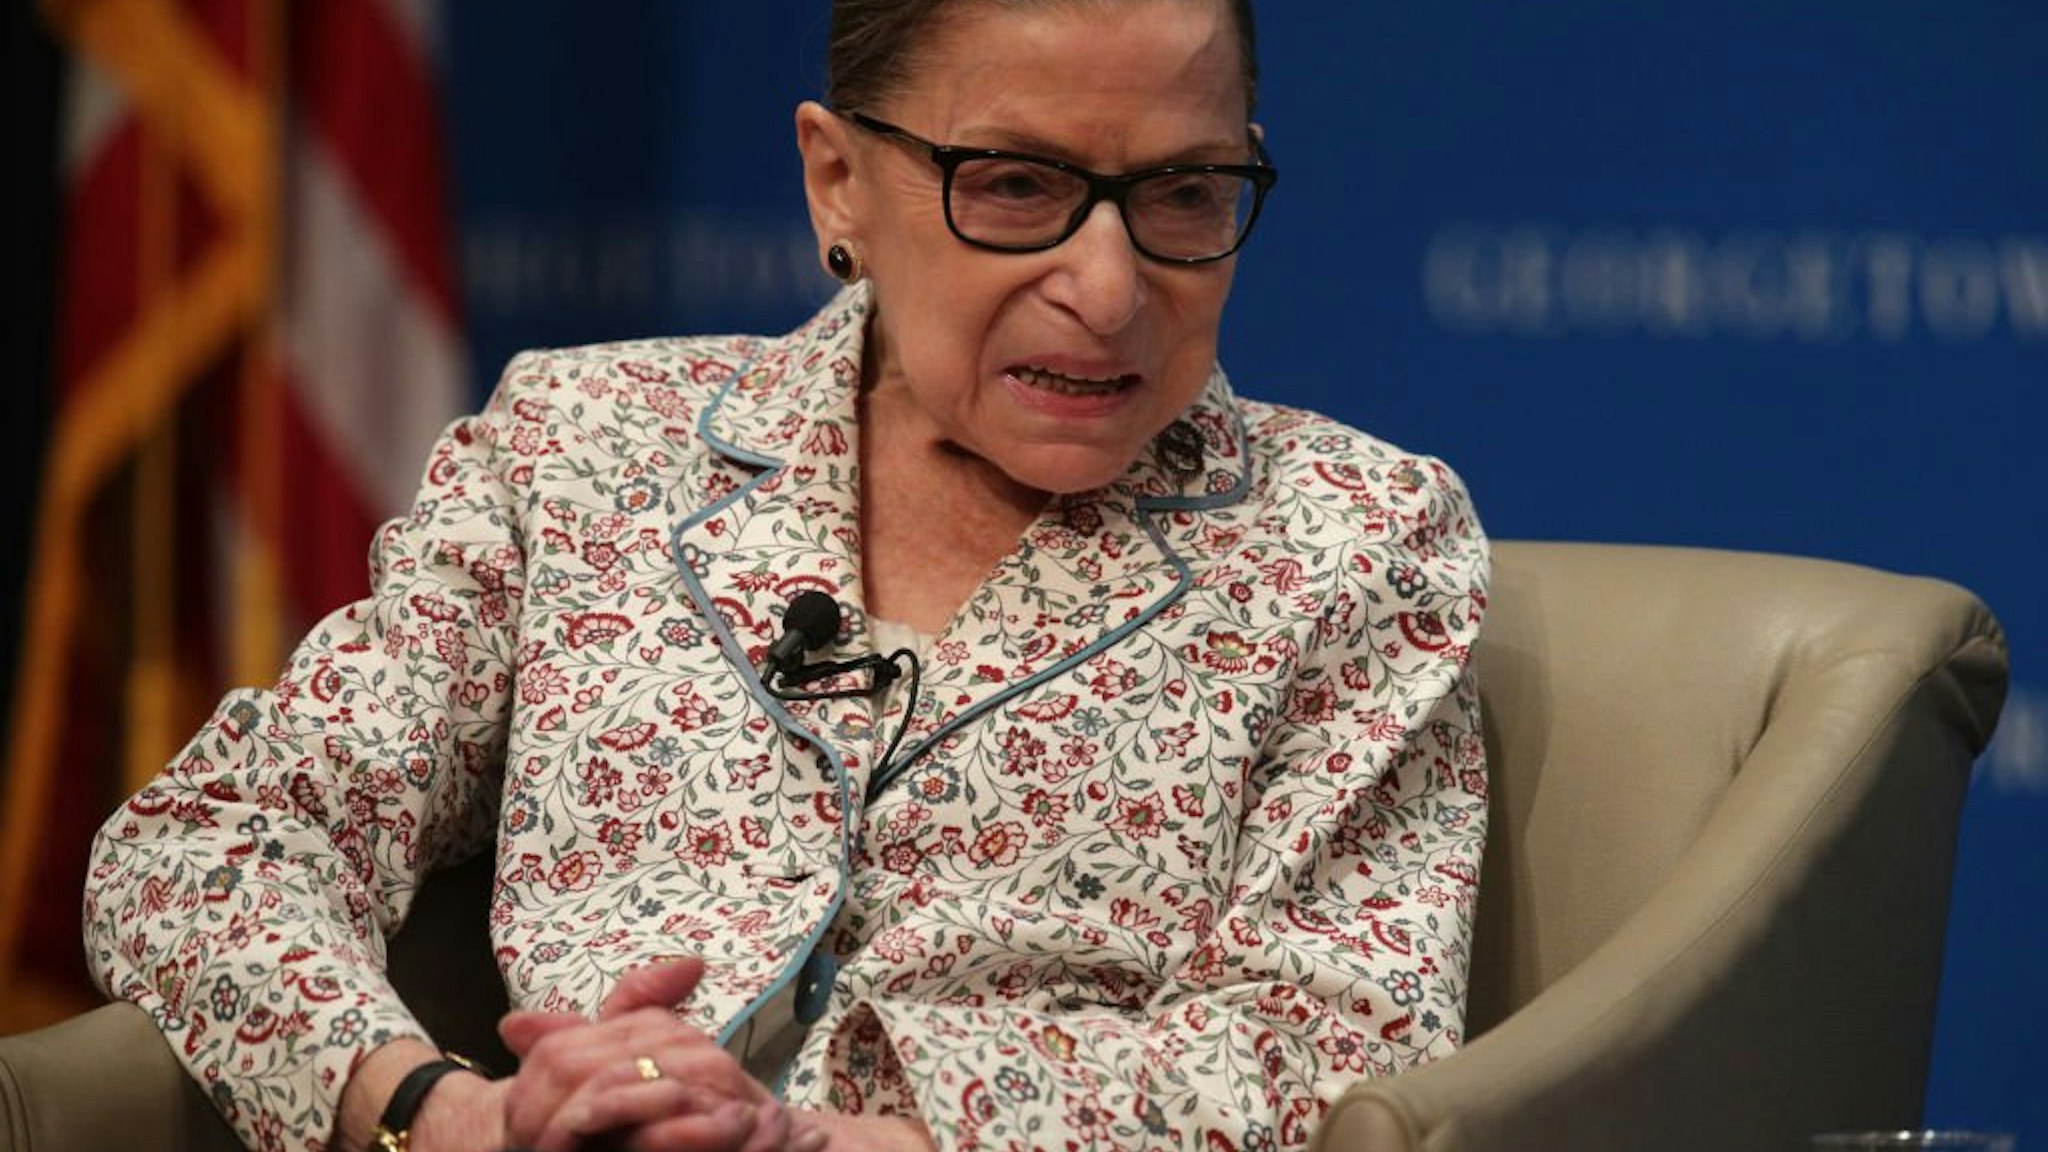 Justice Ruth Bader Ginsburg participates in a discussion at Georgetown University Law Center